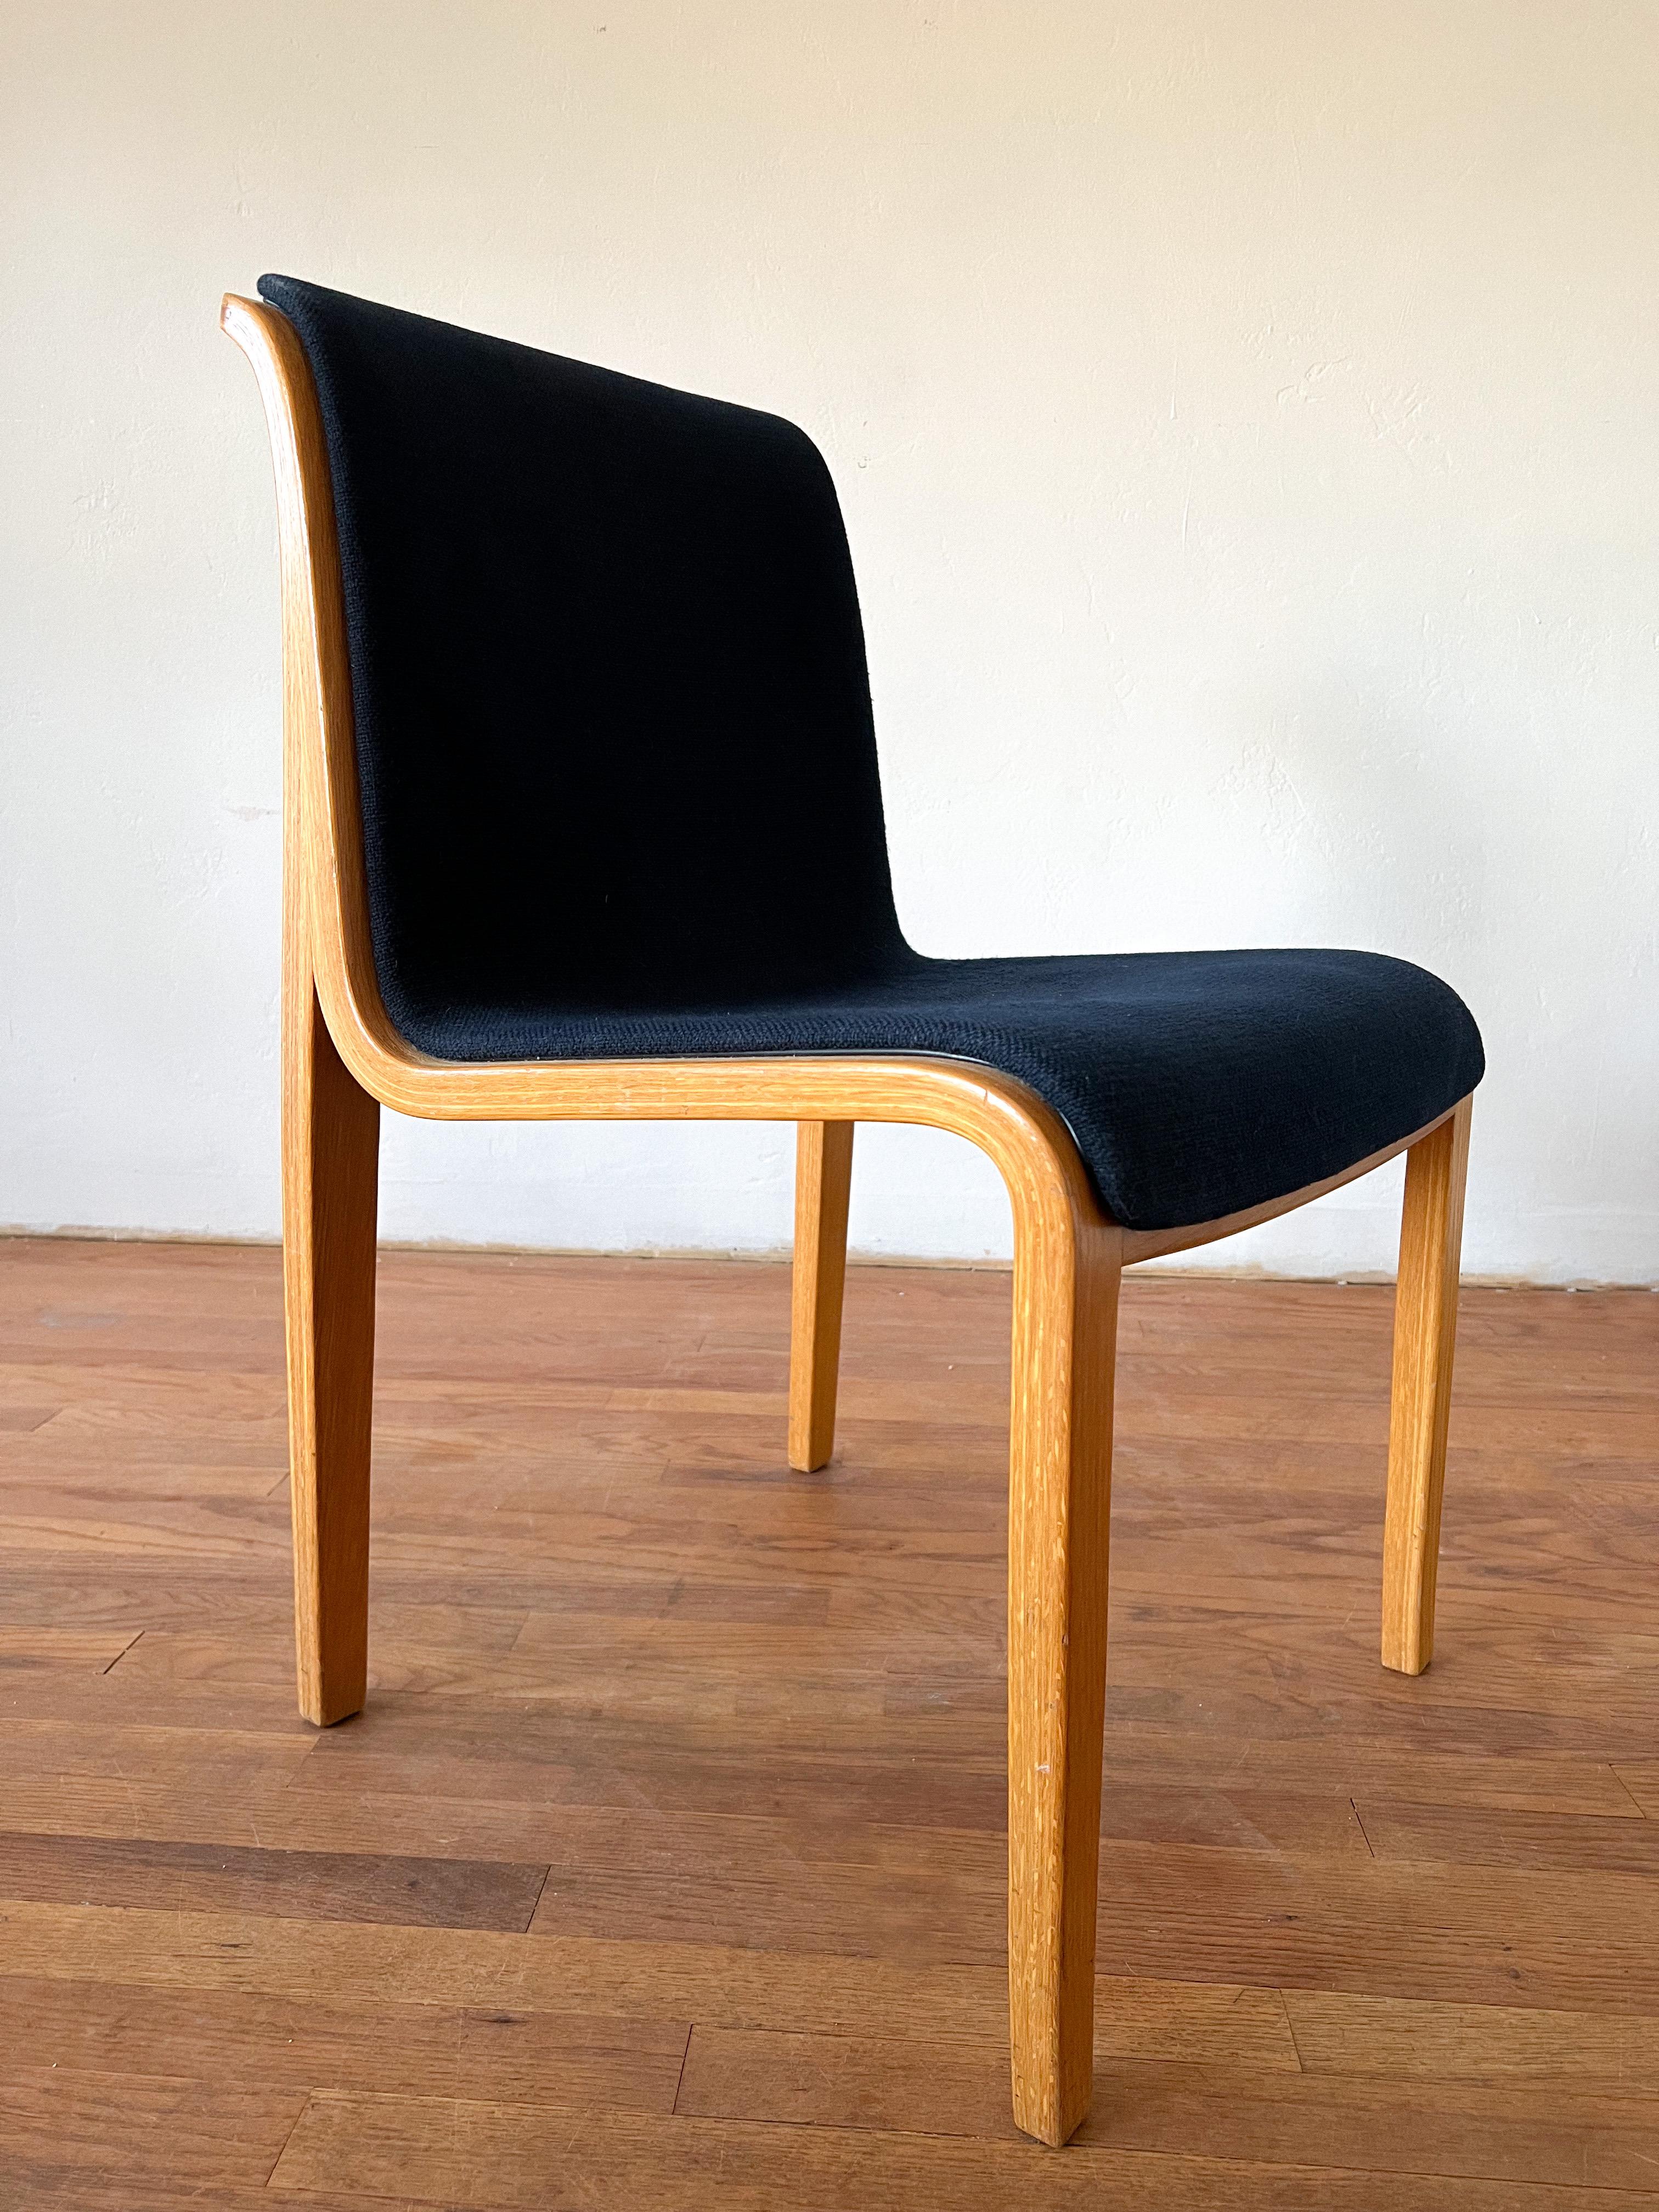 Bill Stephens Bentwood Dining Chair for Knoll In Good Condition For Sale In La Mesa, CA